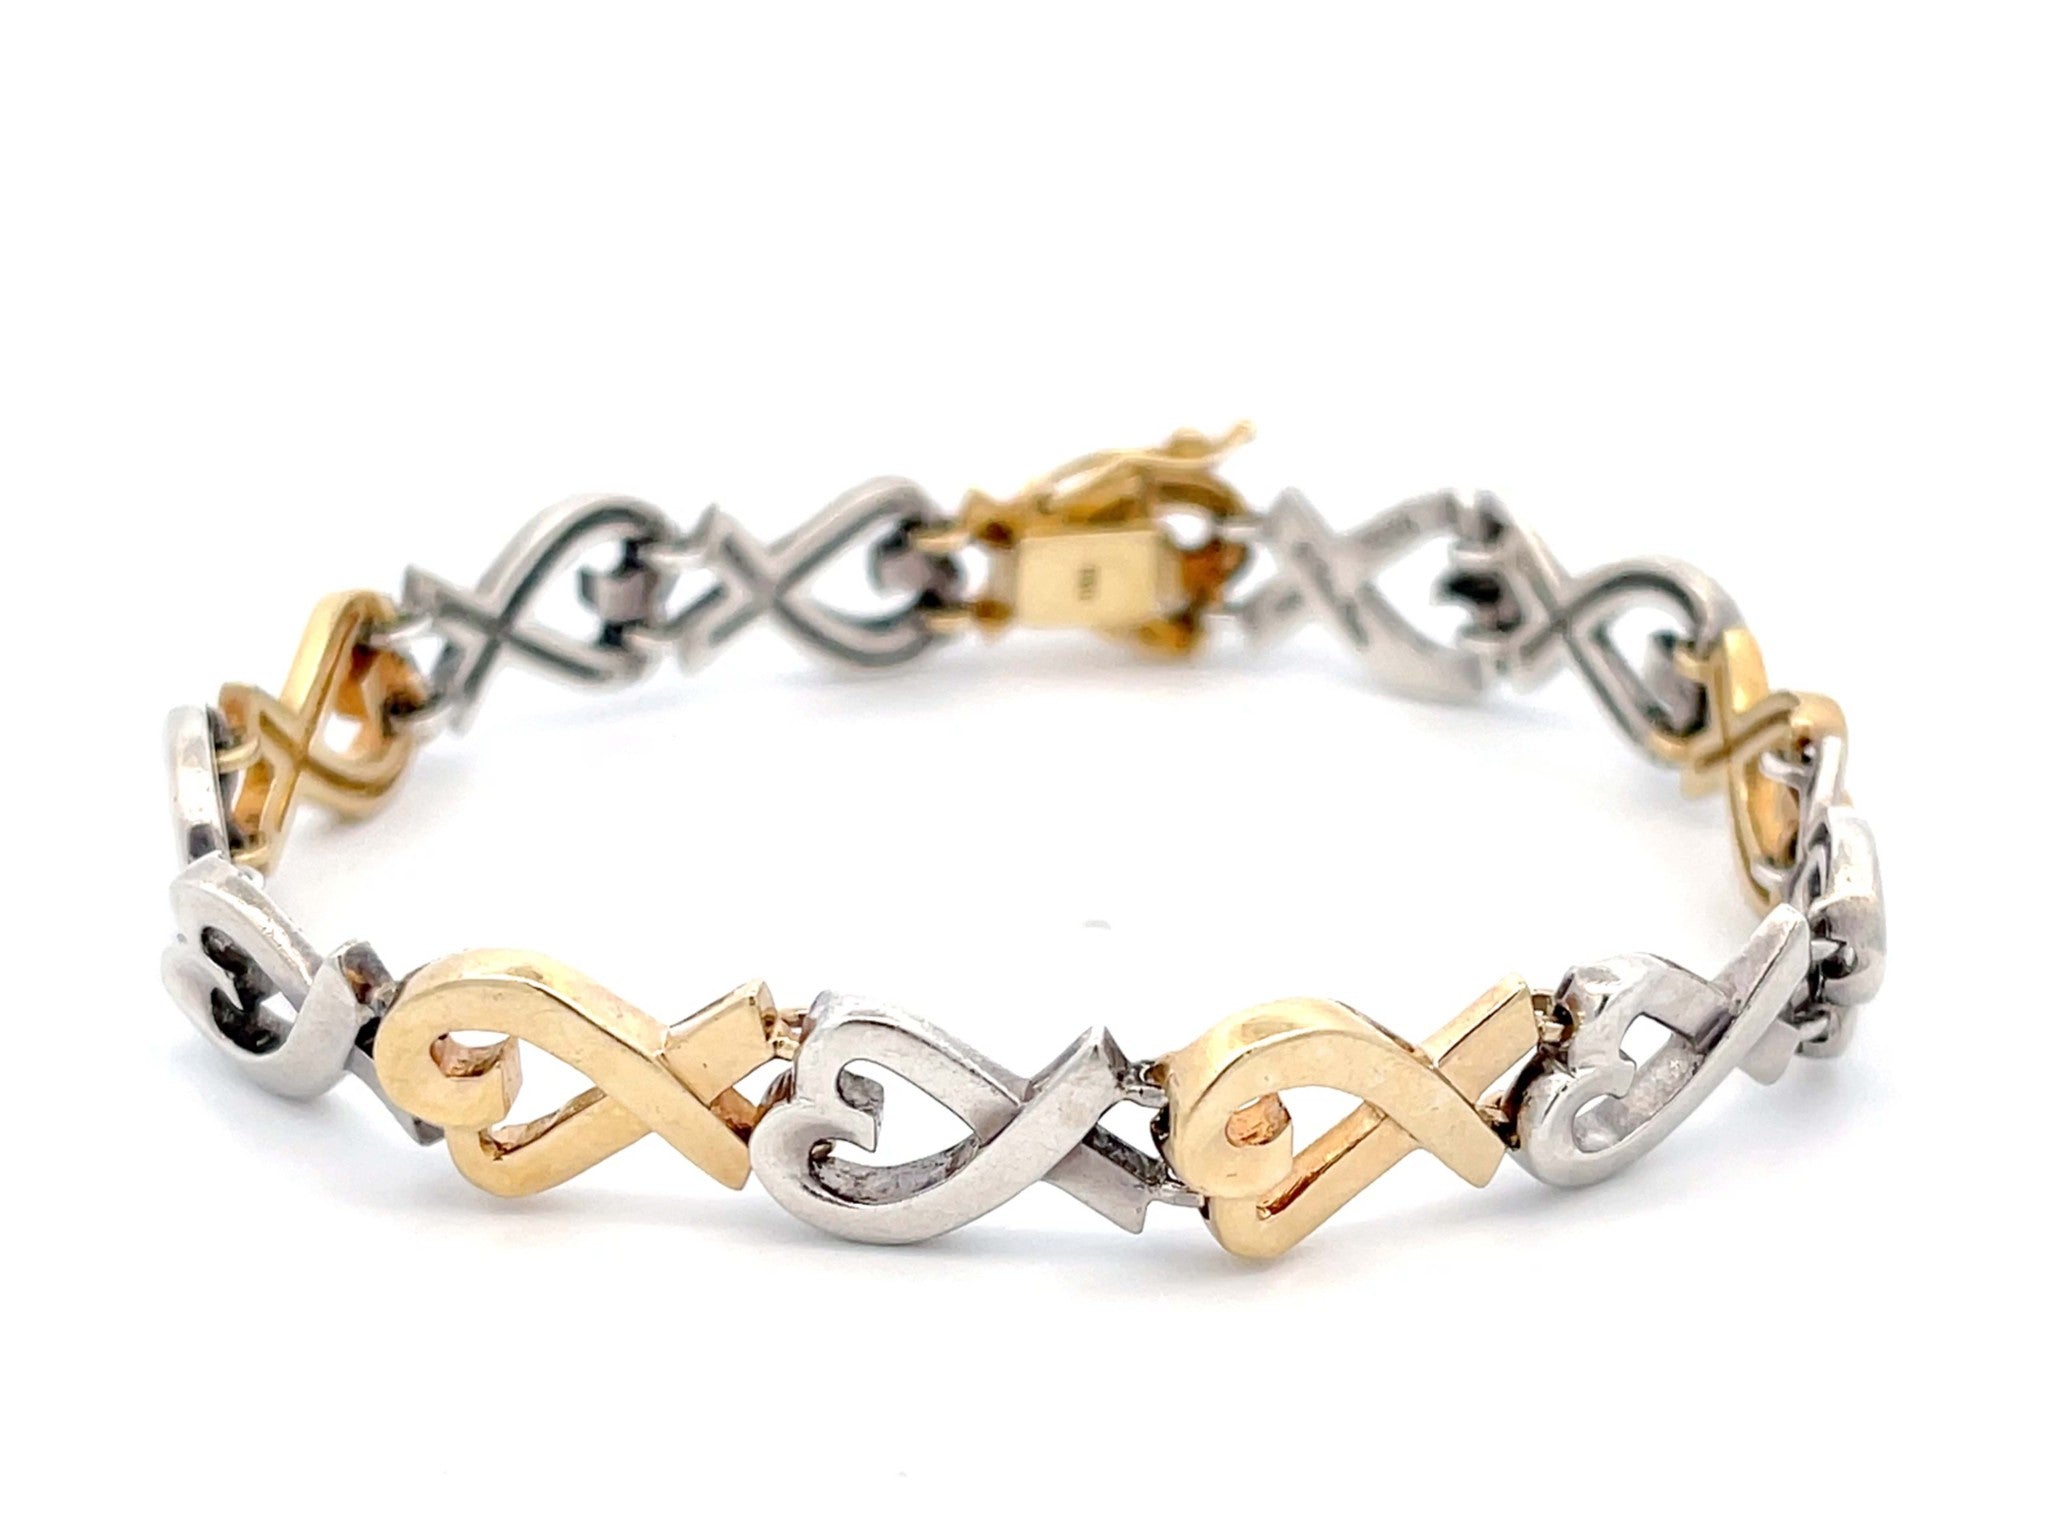 Tiffany and Co. Loving Heart Bracelet Sterling Silver and 18k Yellow Gold